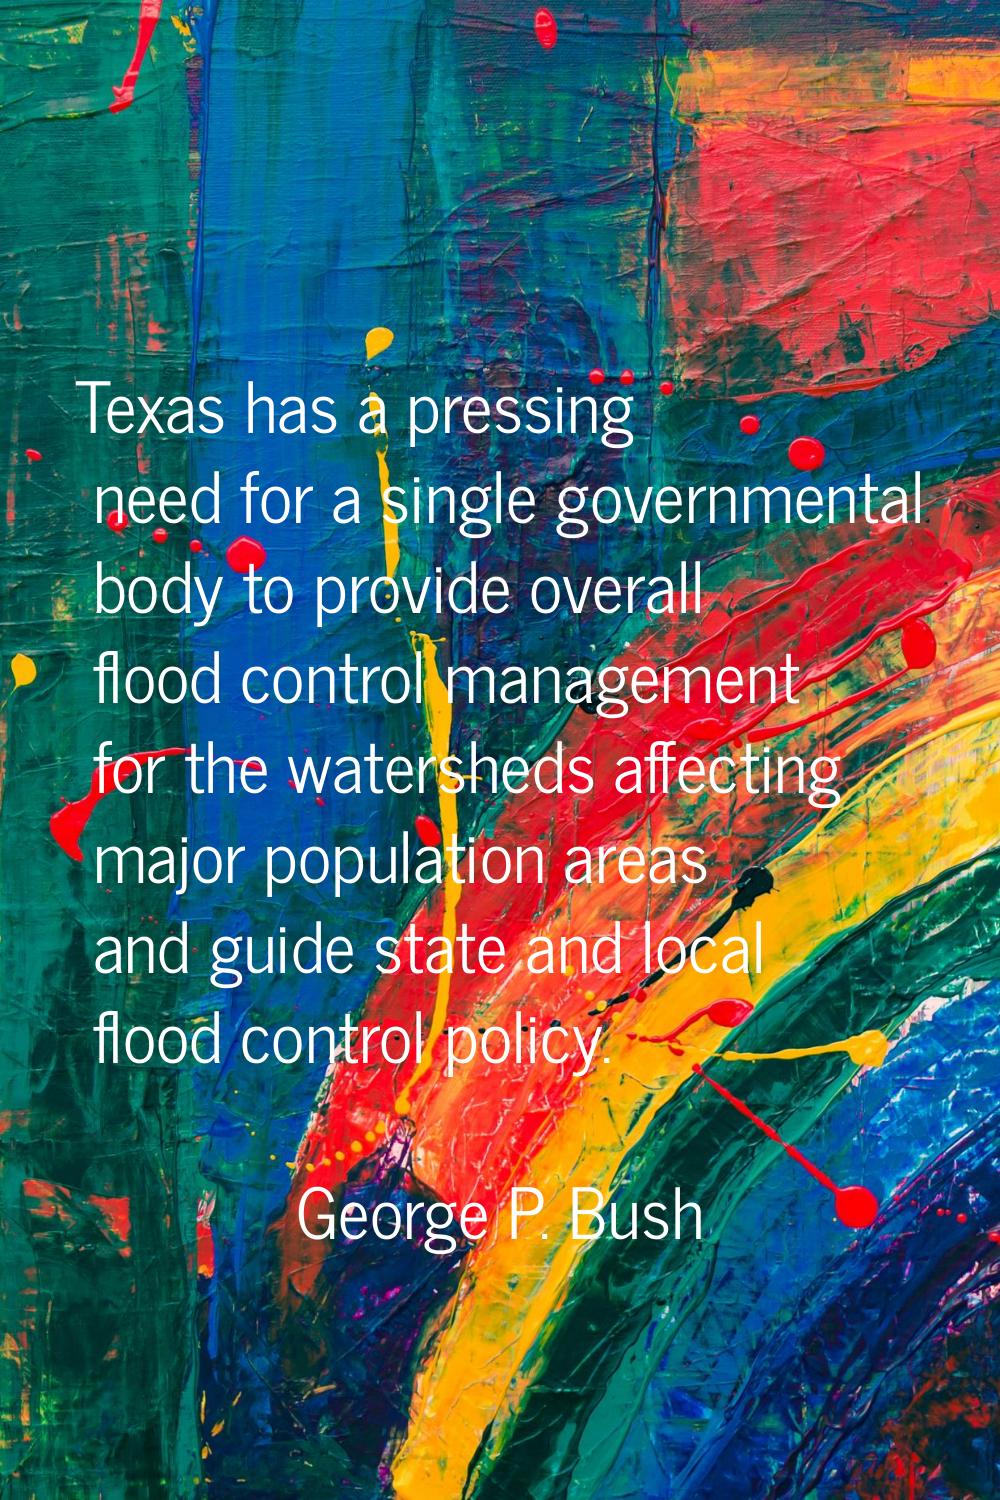 Texas has a pressing need for a single governmental body to provide overall flood control managemen